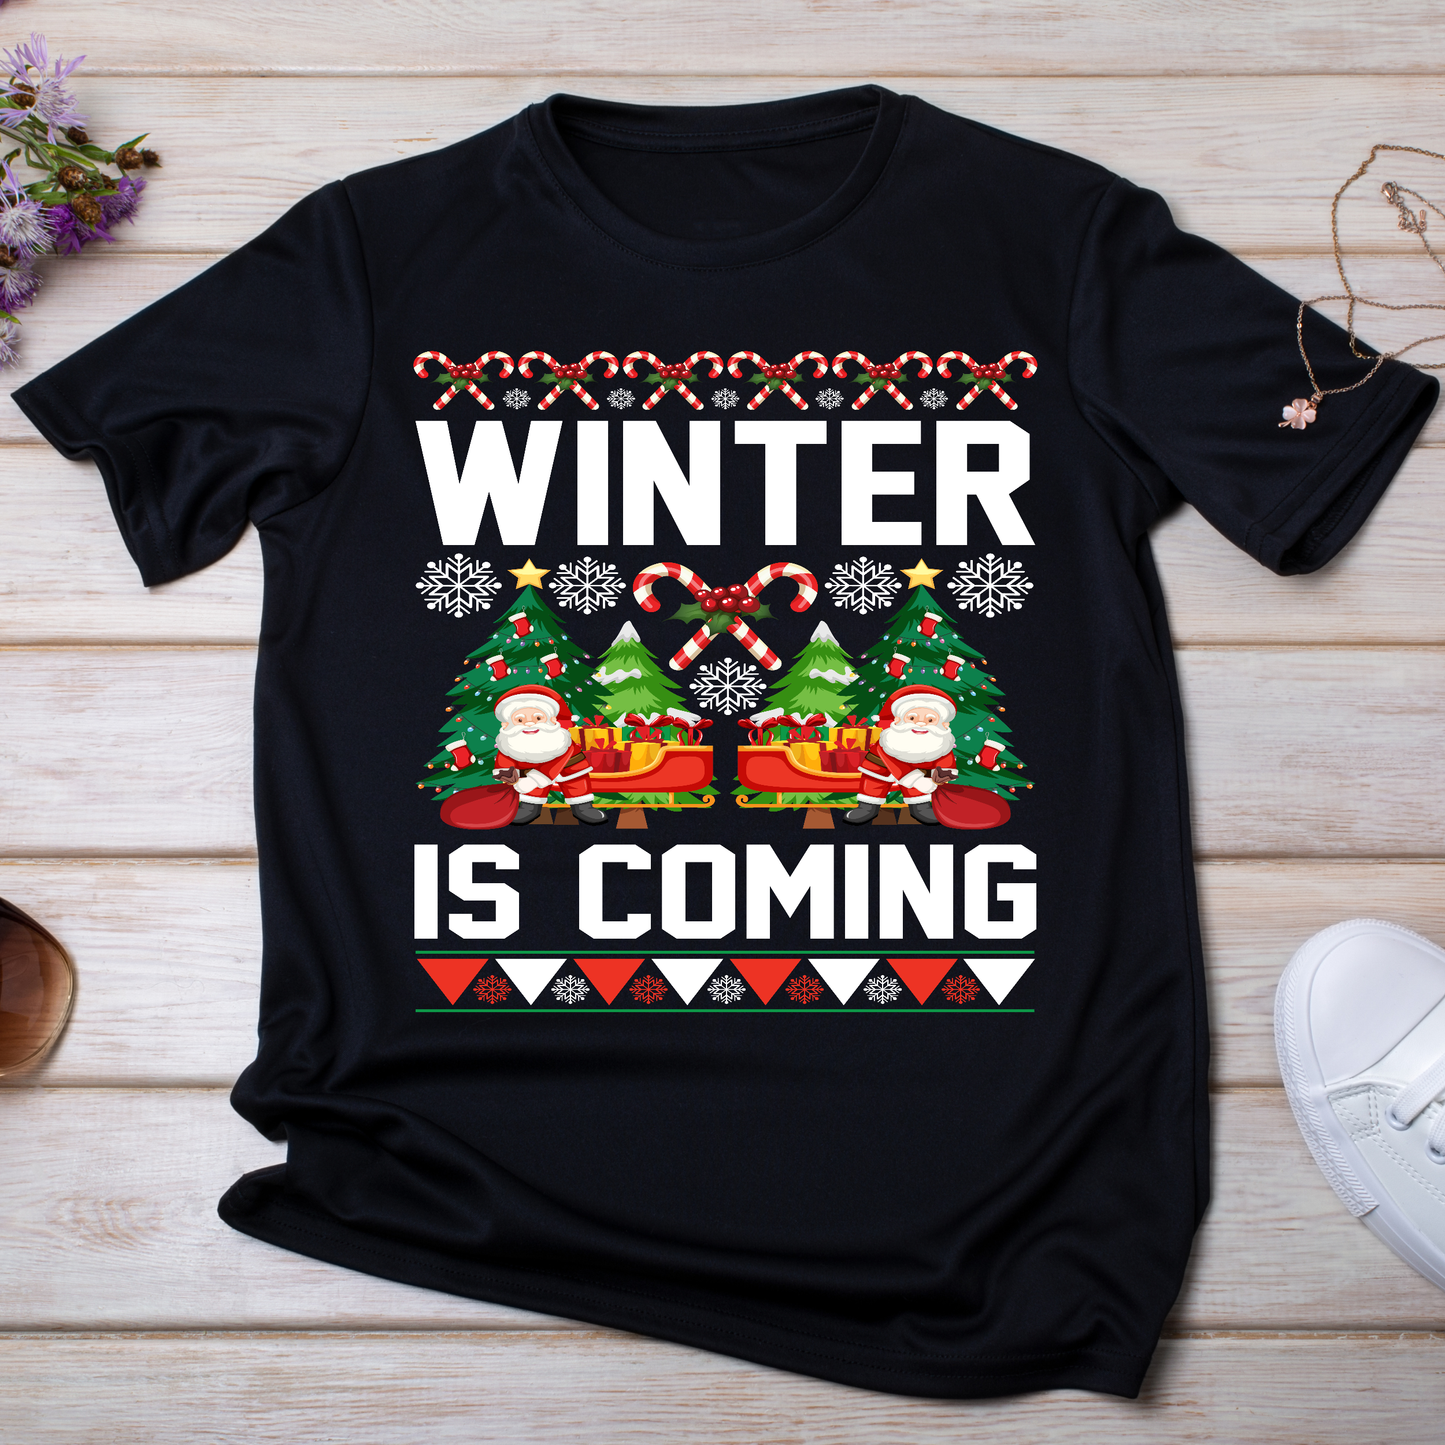 Winter is coming Women's Christmas t-shirt - Premium t-shirt from Lees Krazy Teez - Just $21.95! Shop now at Lees Krazy Teez